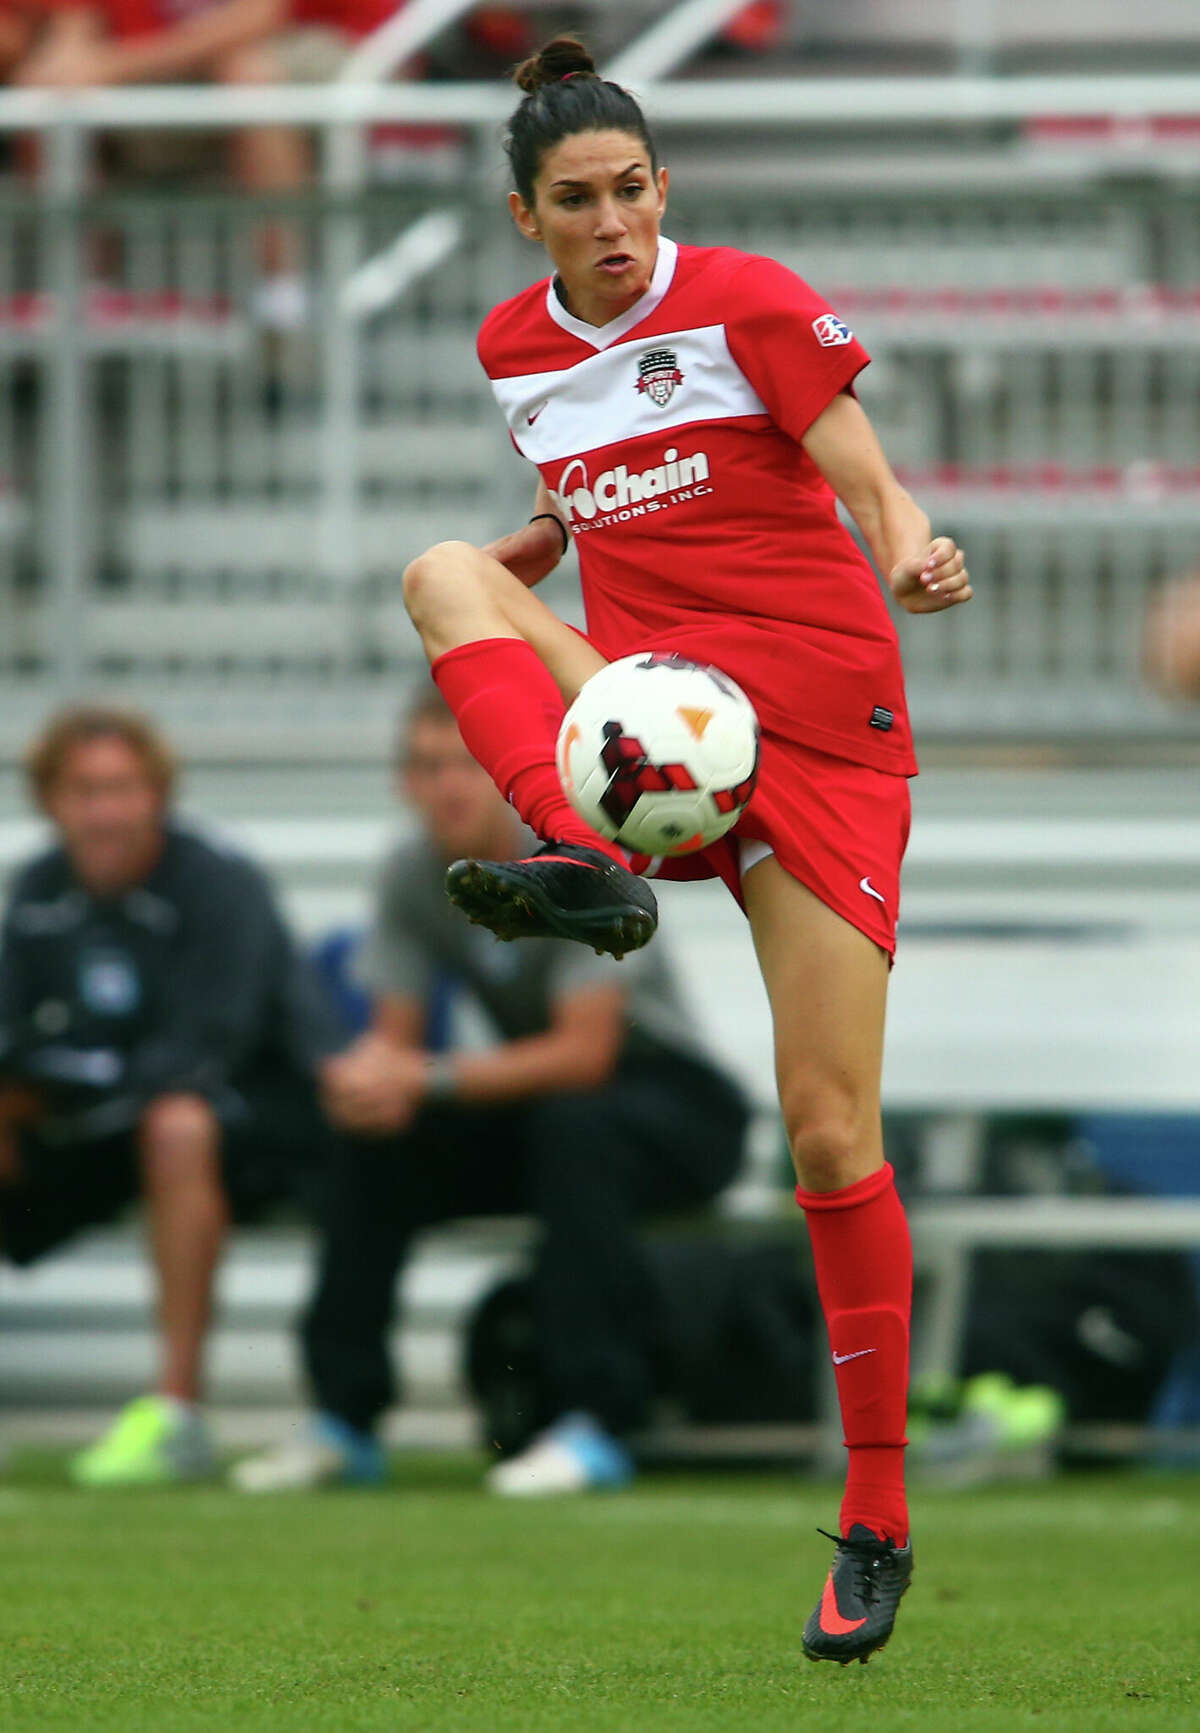 Alex Singer of the Washington Spirit controls the ball against the Chicago Red Stars during a WNSL match at the Maryland Soccerplex in Boyds, Maryland on Aug. 2, 2014.